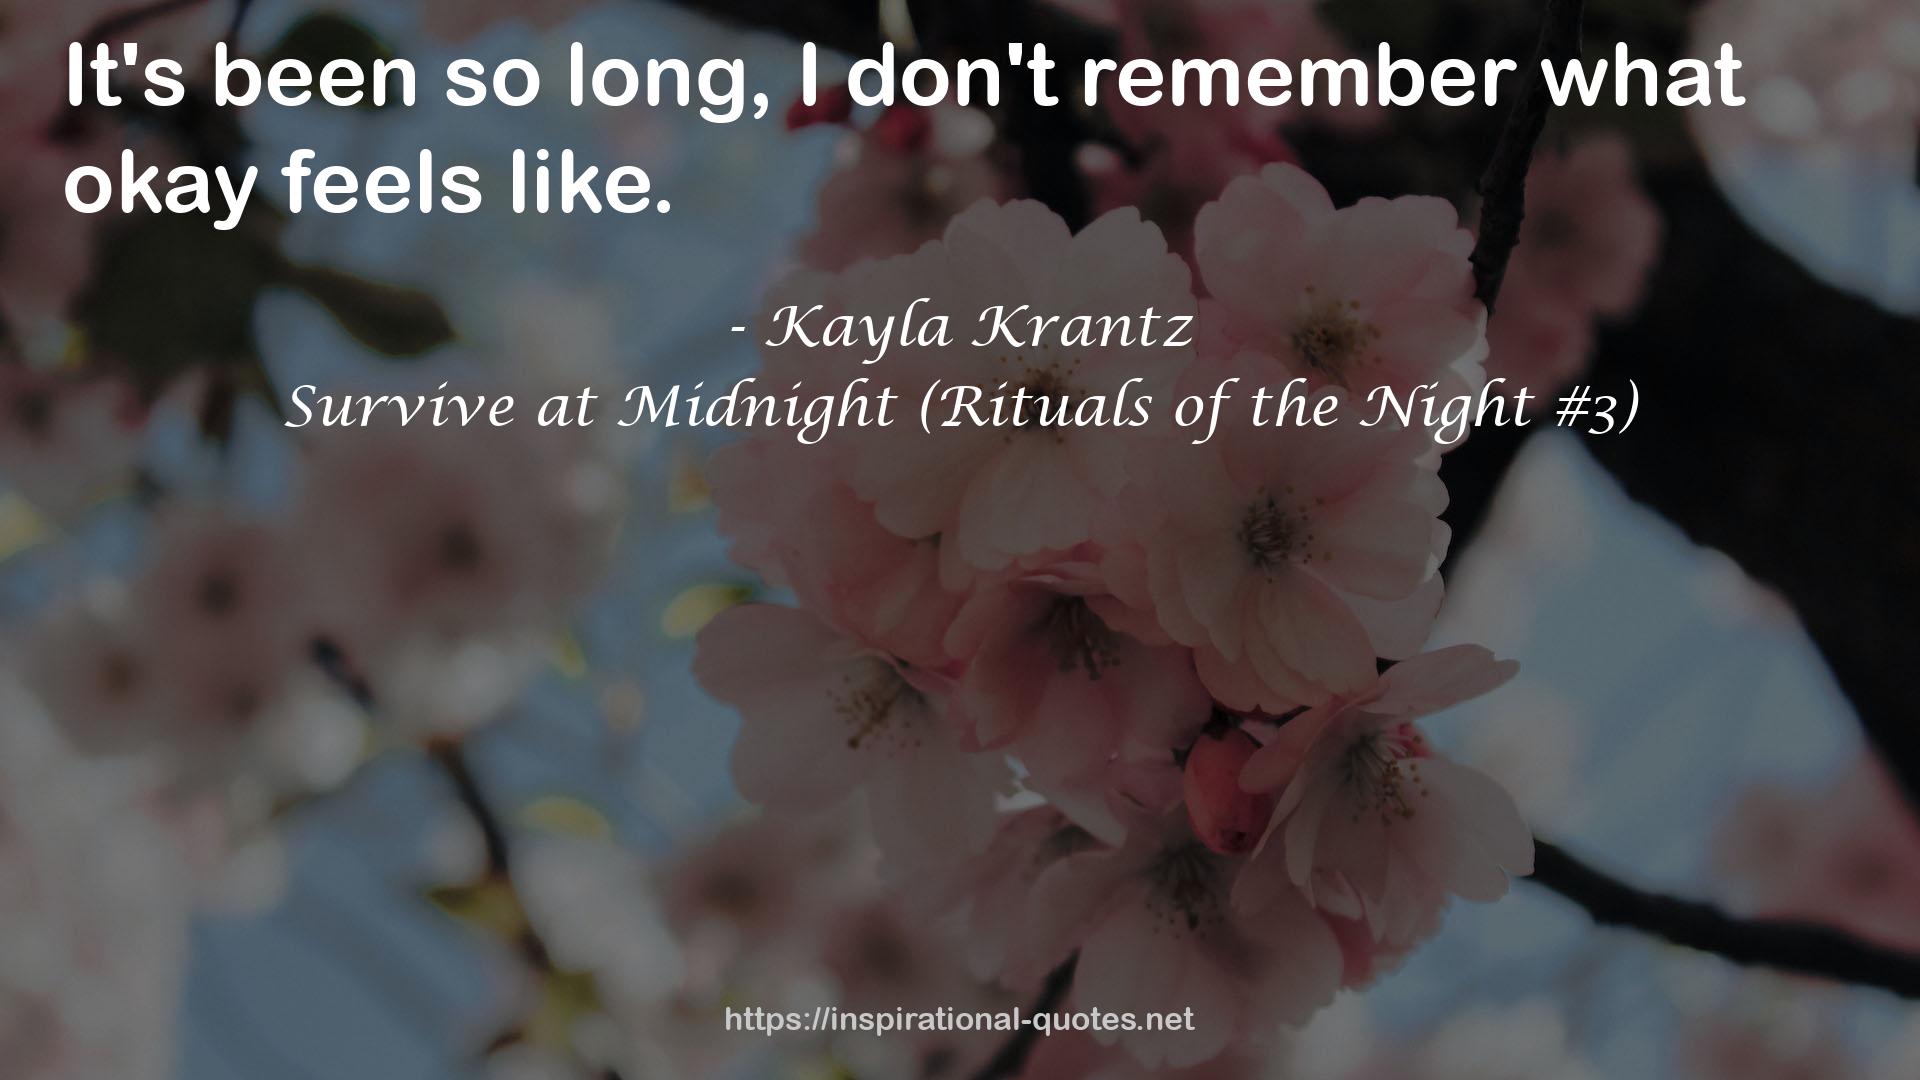 Survive at Midnight (Rituals of the Night #3) QUOTES